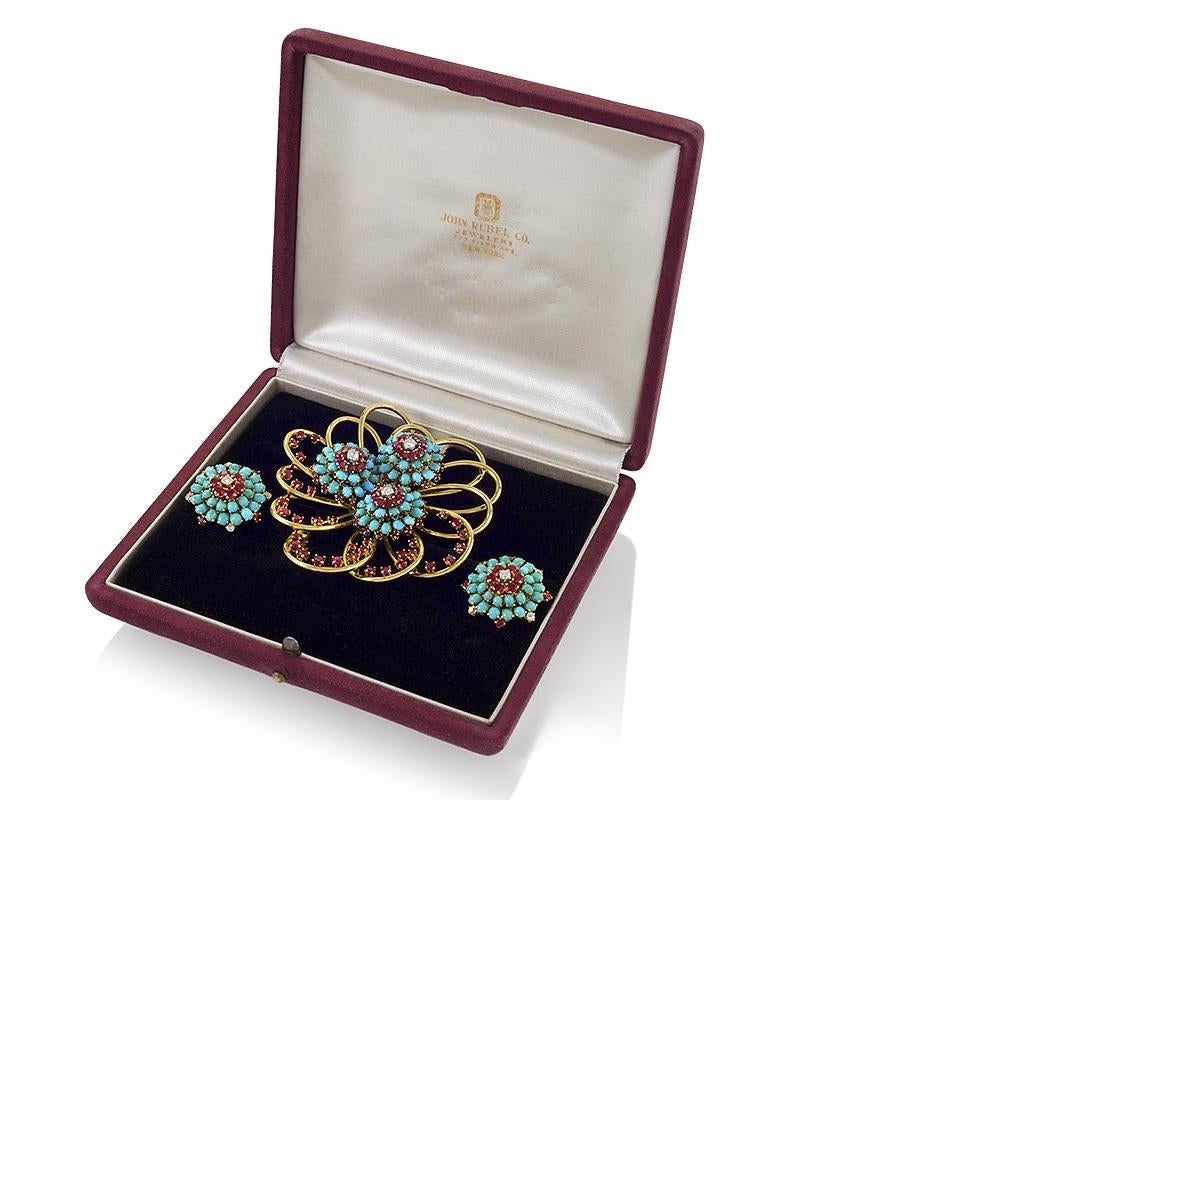 An American mid-20th century 18 karat gold brooch and earrings suite with rubies, diamonds and turquoise by John Rubel. The brooch is an openwork bloom comprised of large gold loops studded with accenting rubies that expertly play with the negative